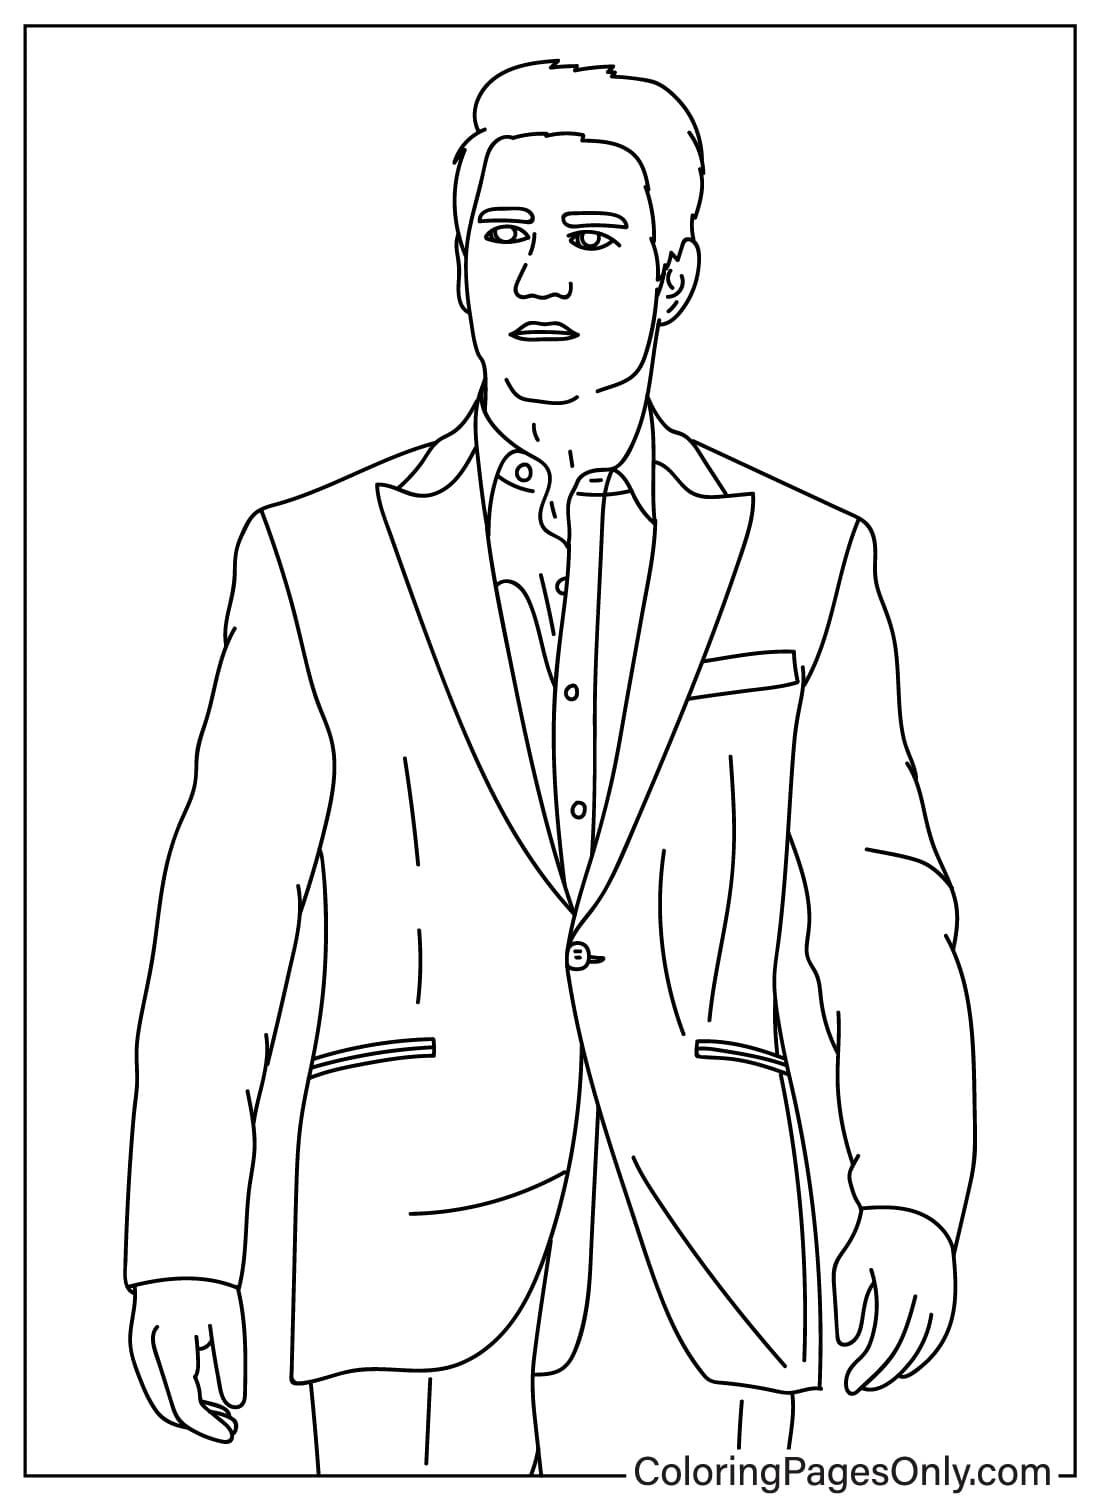 Tom Cruise Coloring Pages - Free Printable Coloring Pages